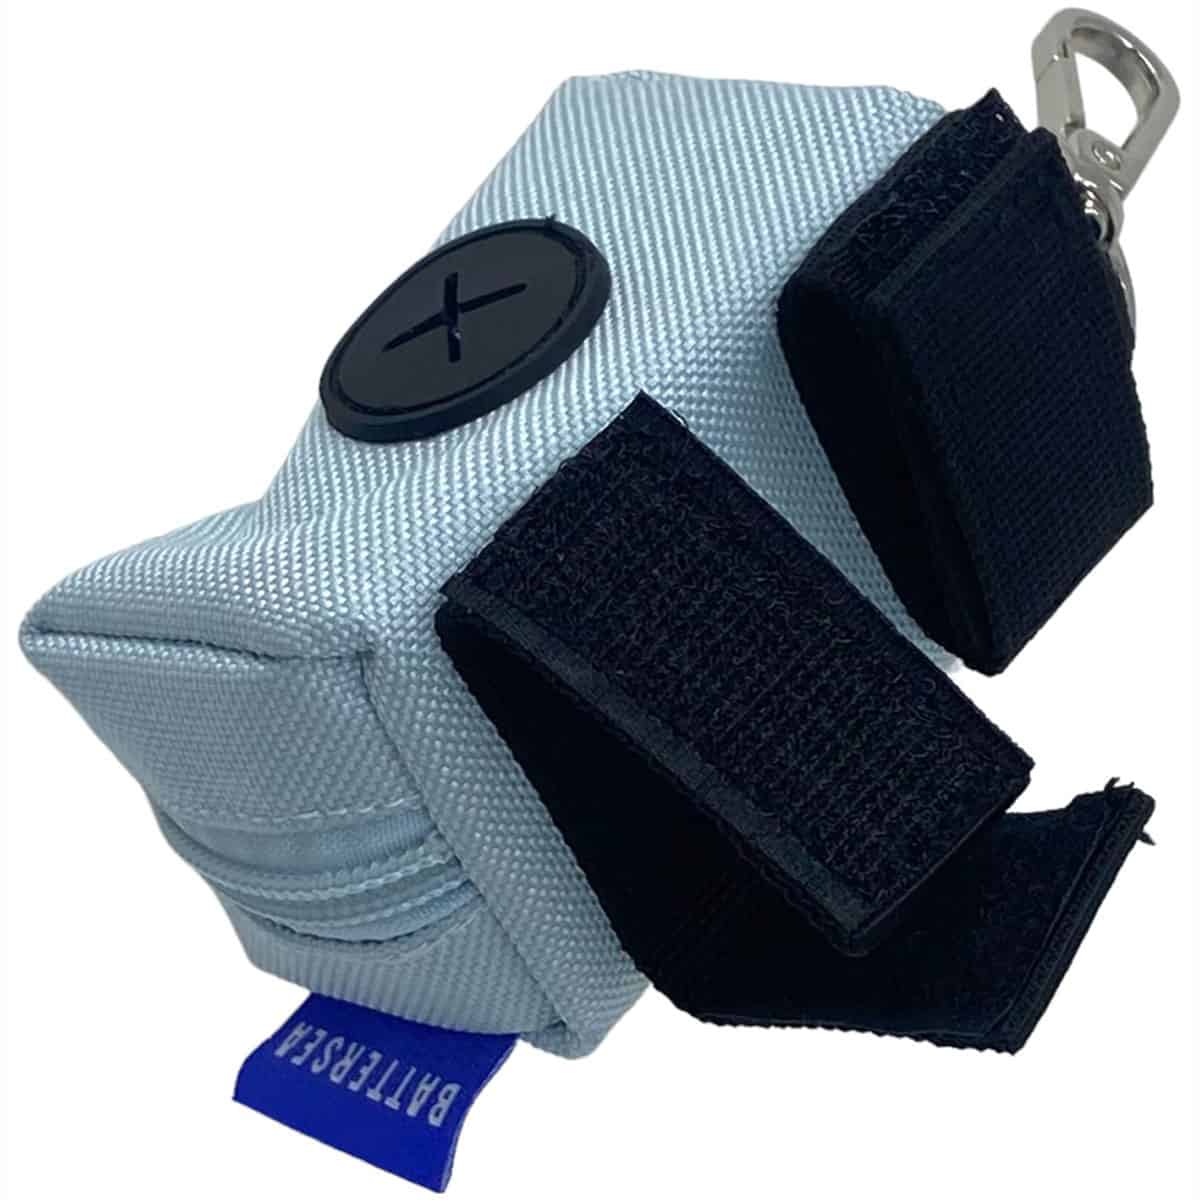 The Battersea Poop Bag Holder: Lightweight & portable, elevate your strolls with the convenience of the Battersea Poop Bag Holder - velcro loops open